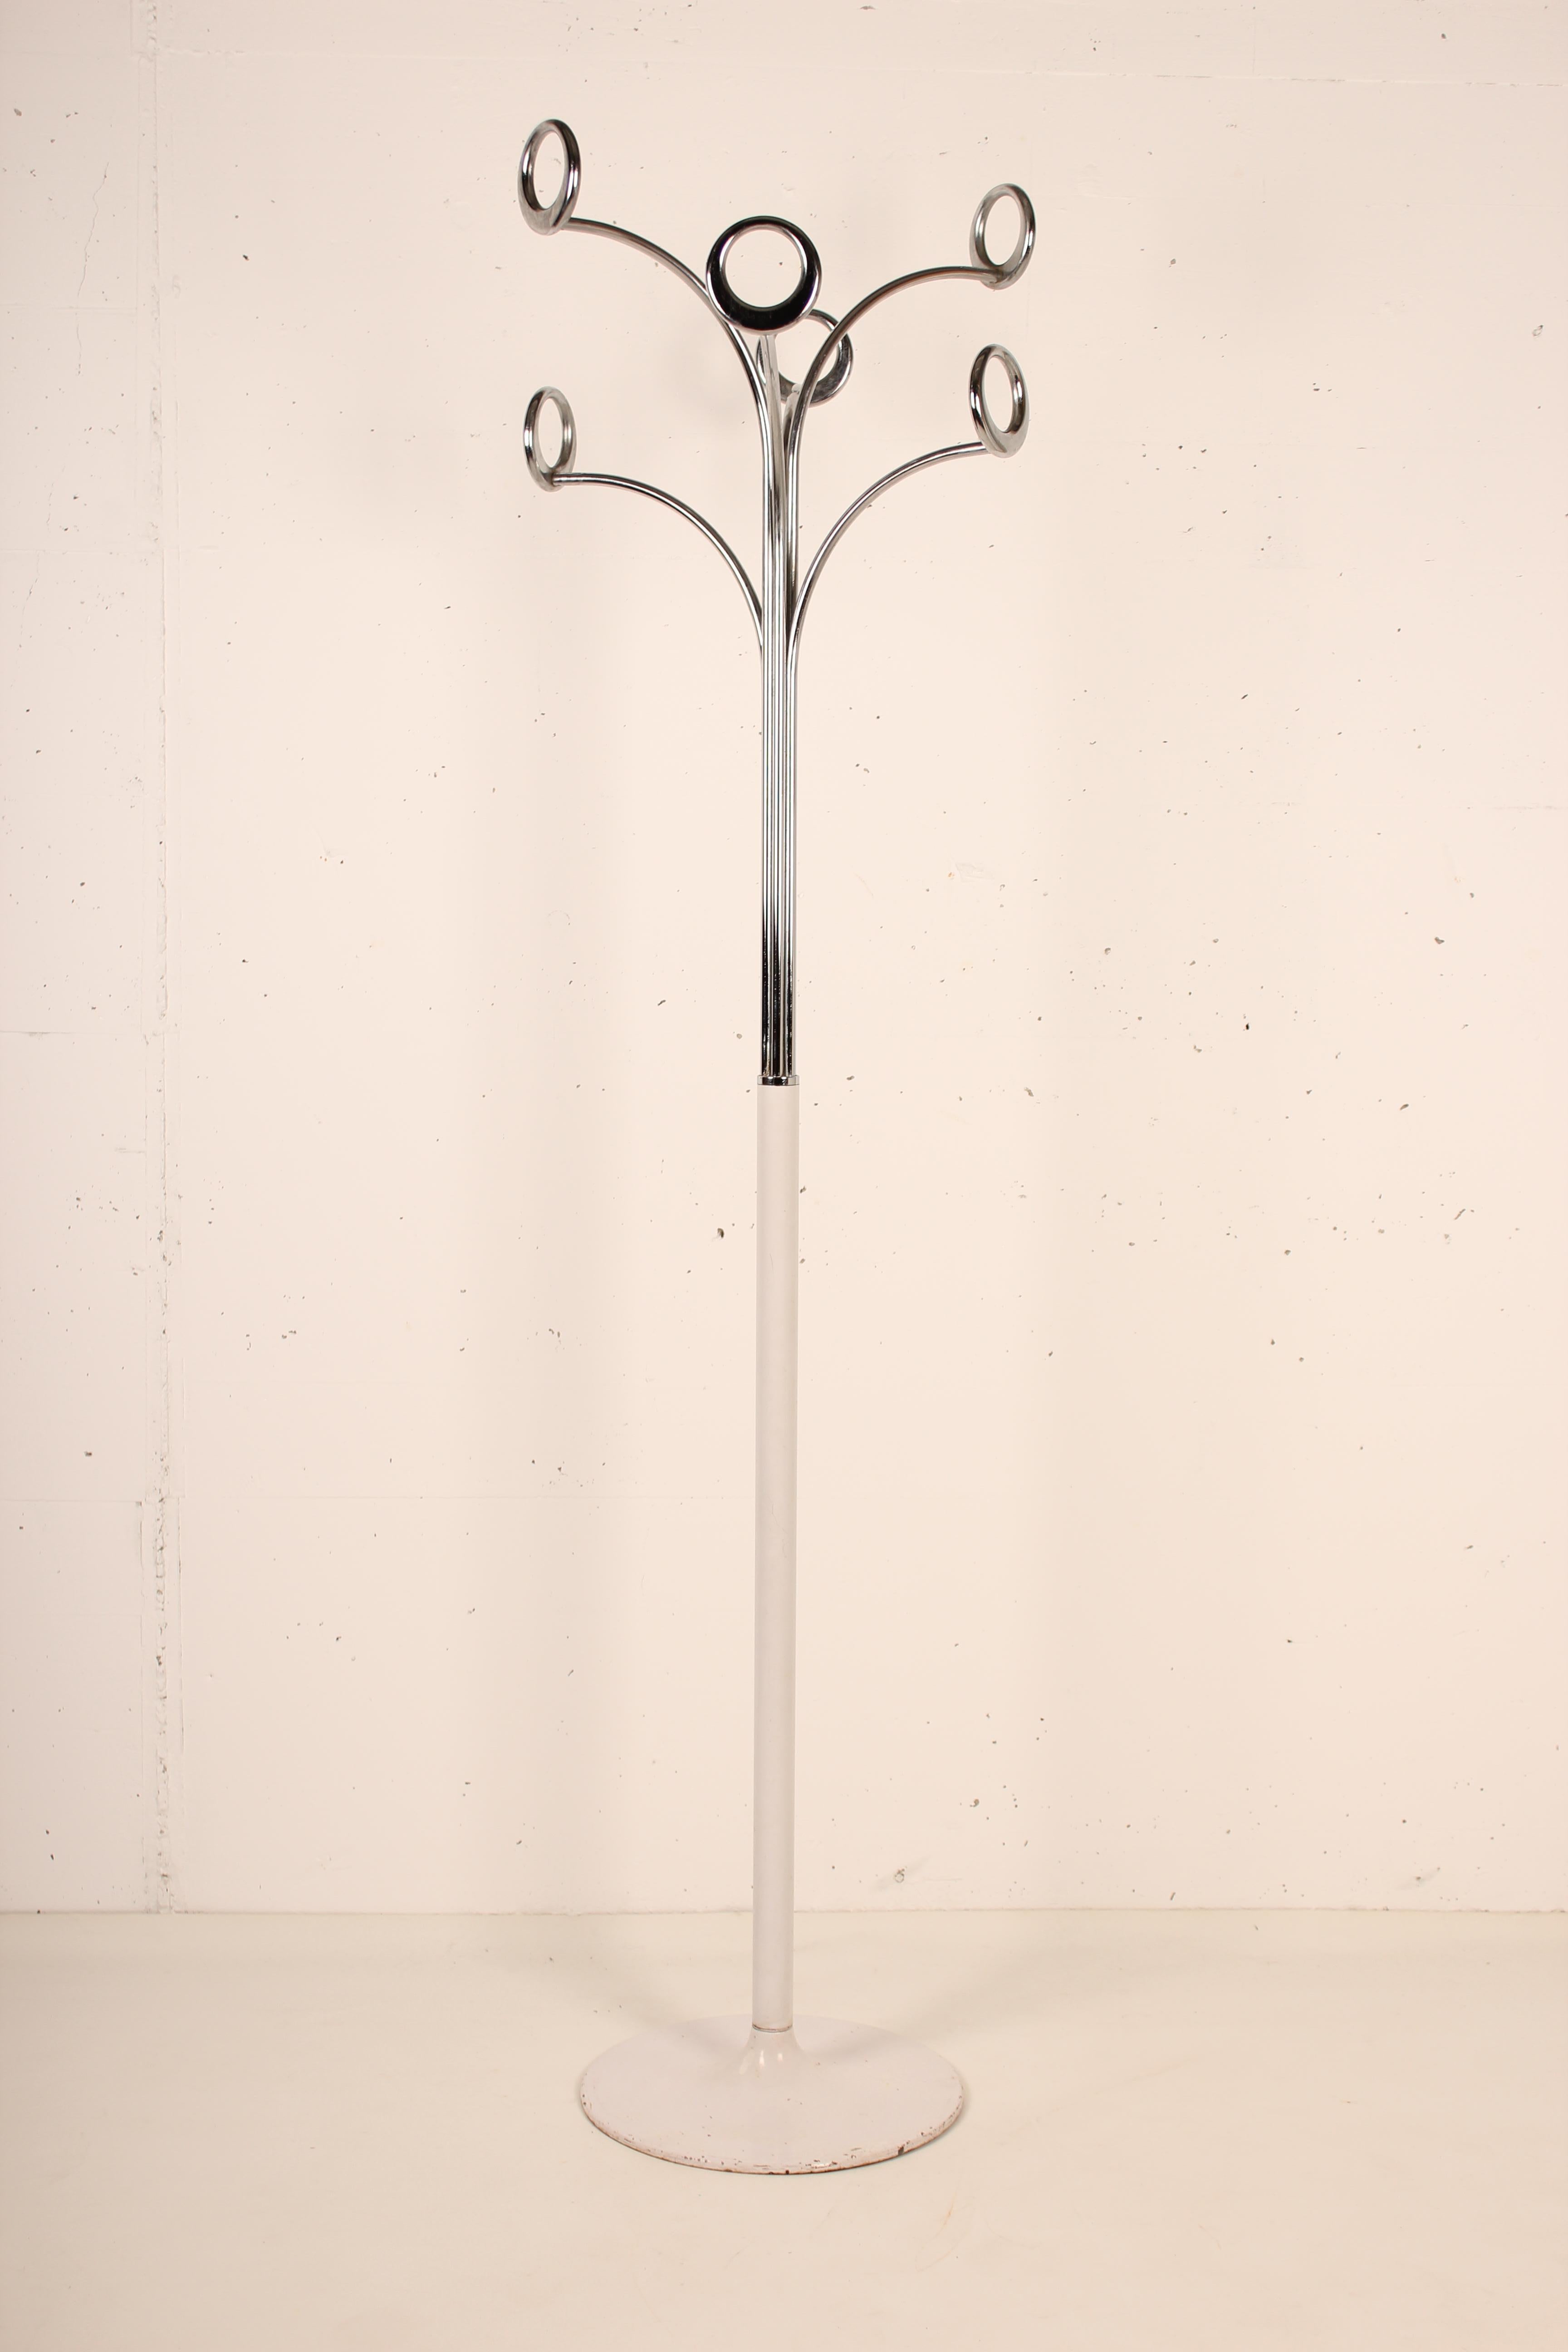 Original and splendid 1970s coat stand designed and manufactured by Fase in Spain.
6 chrome tubes come out of a white metal base.